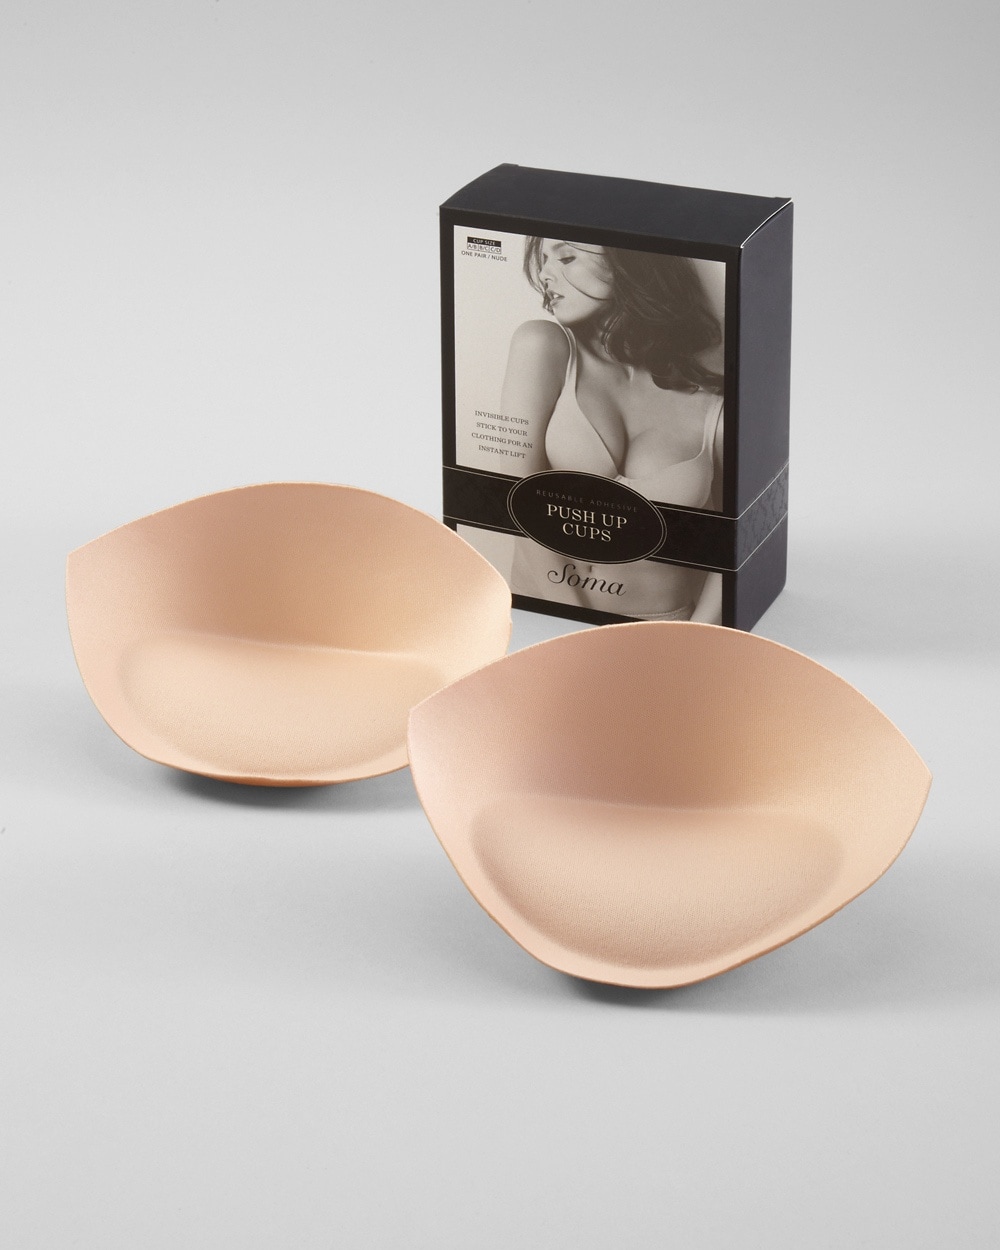 Fabric Push-Up Cups - Soma